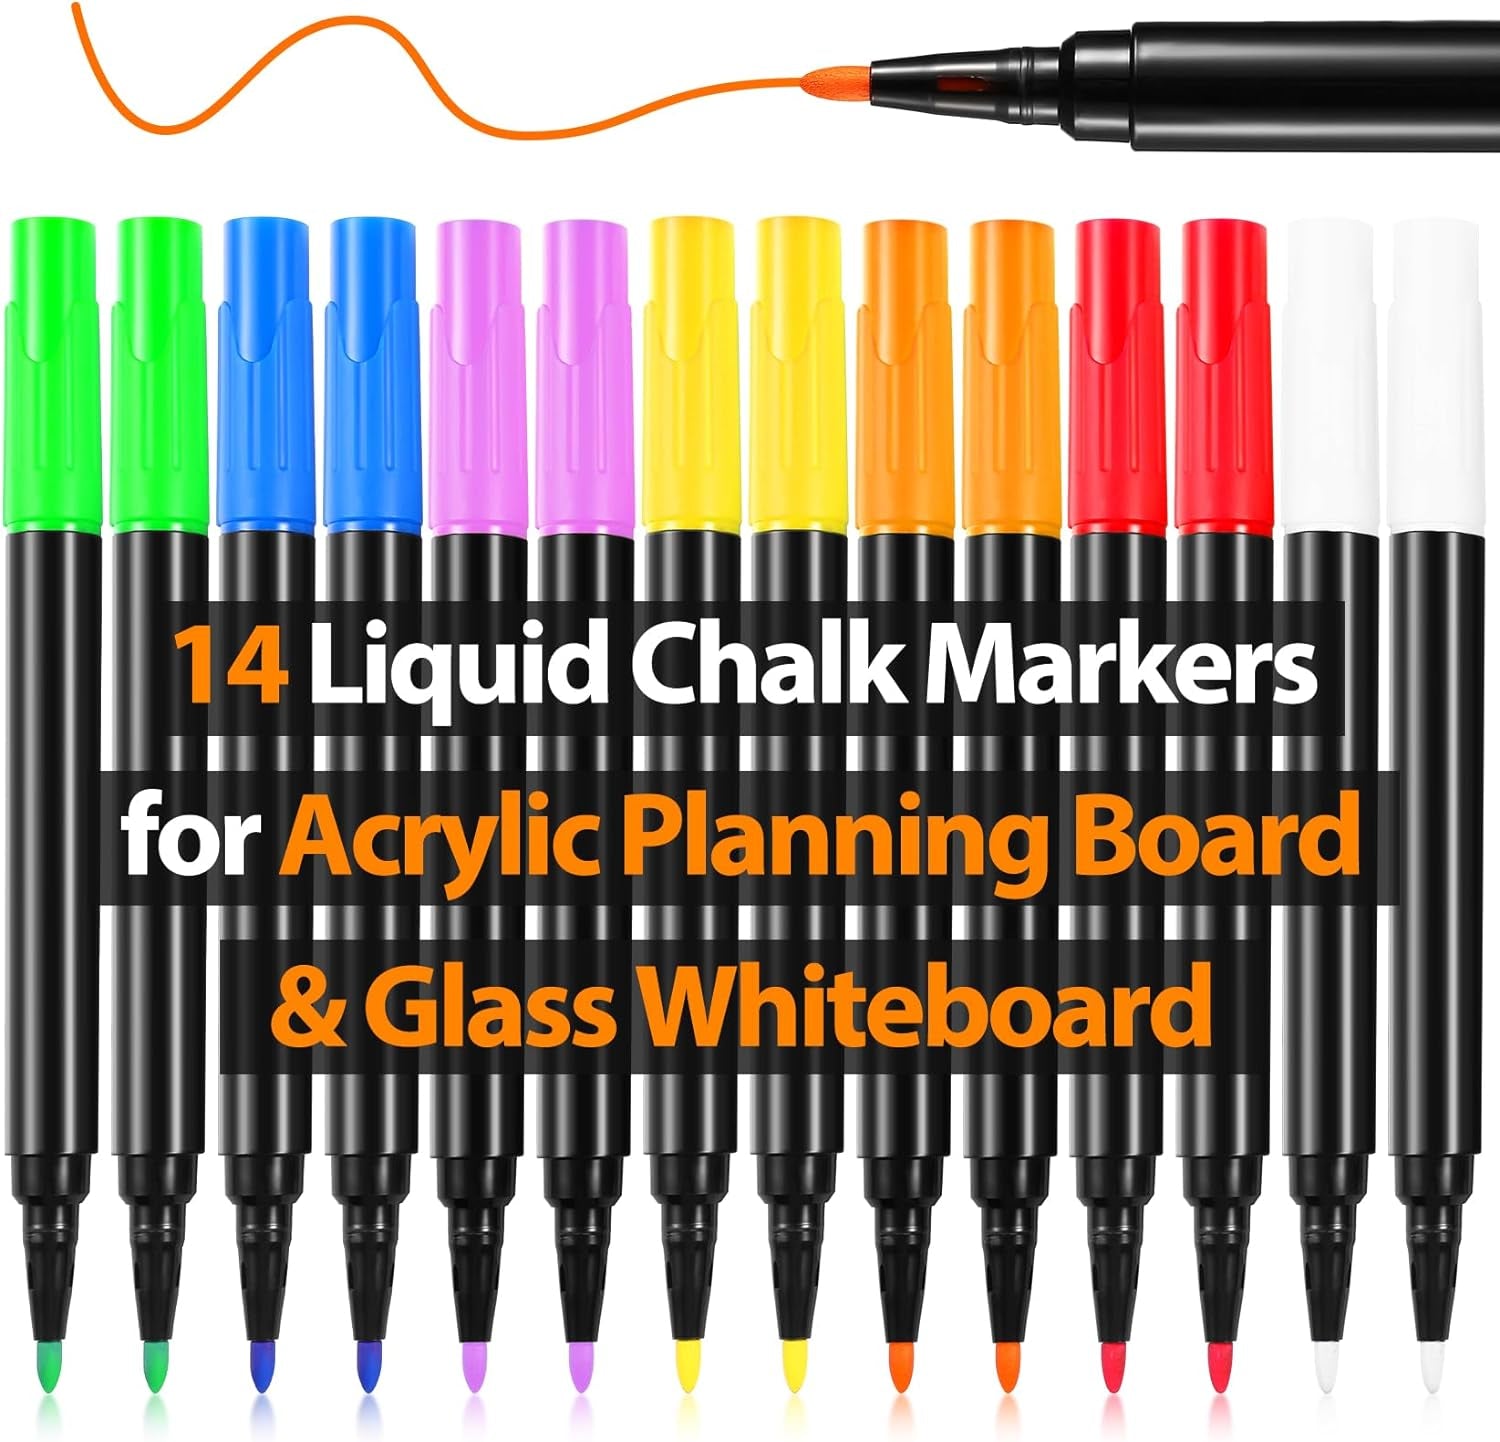 Liquid Chalk Markers for Acrylic Fridge Calendar Planning Board Clear Glass Dry Erase Board Refrigerator Whiteboard for Window/Mirror, 14 Pack, 7 Vibrant Colors, 1Mm Fine Points, Easy Wet Erase